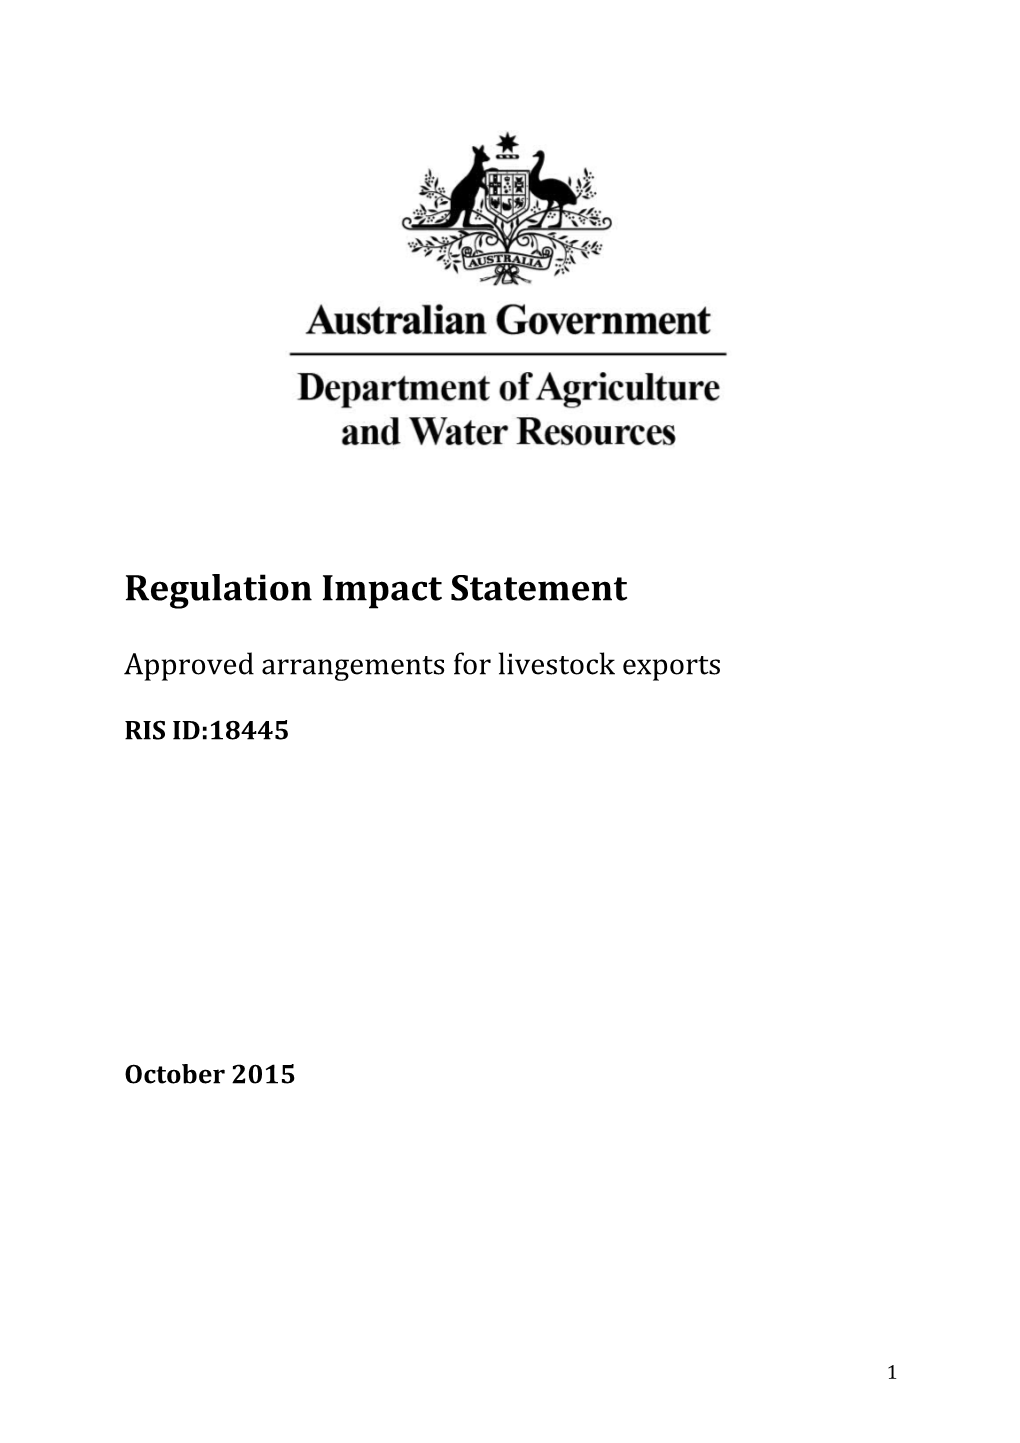 Approved Arrangements for Livestock Exports RIS